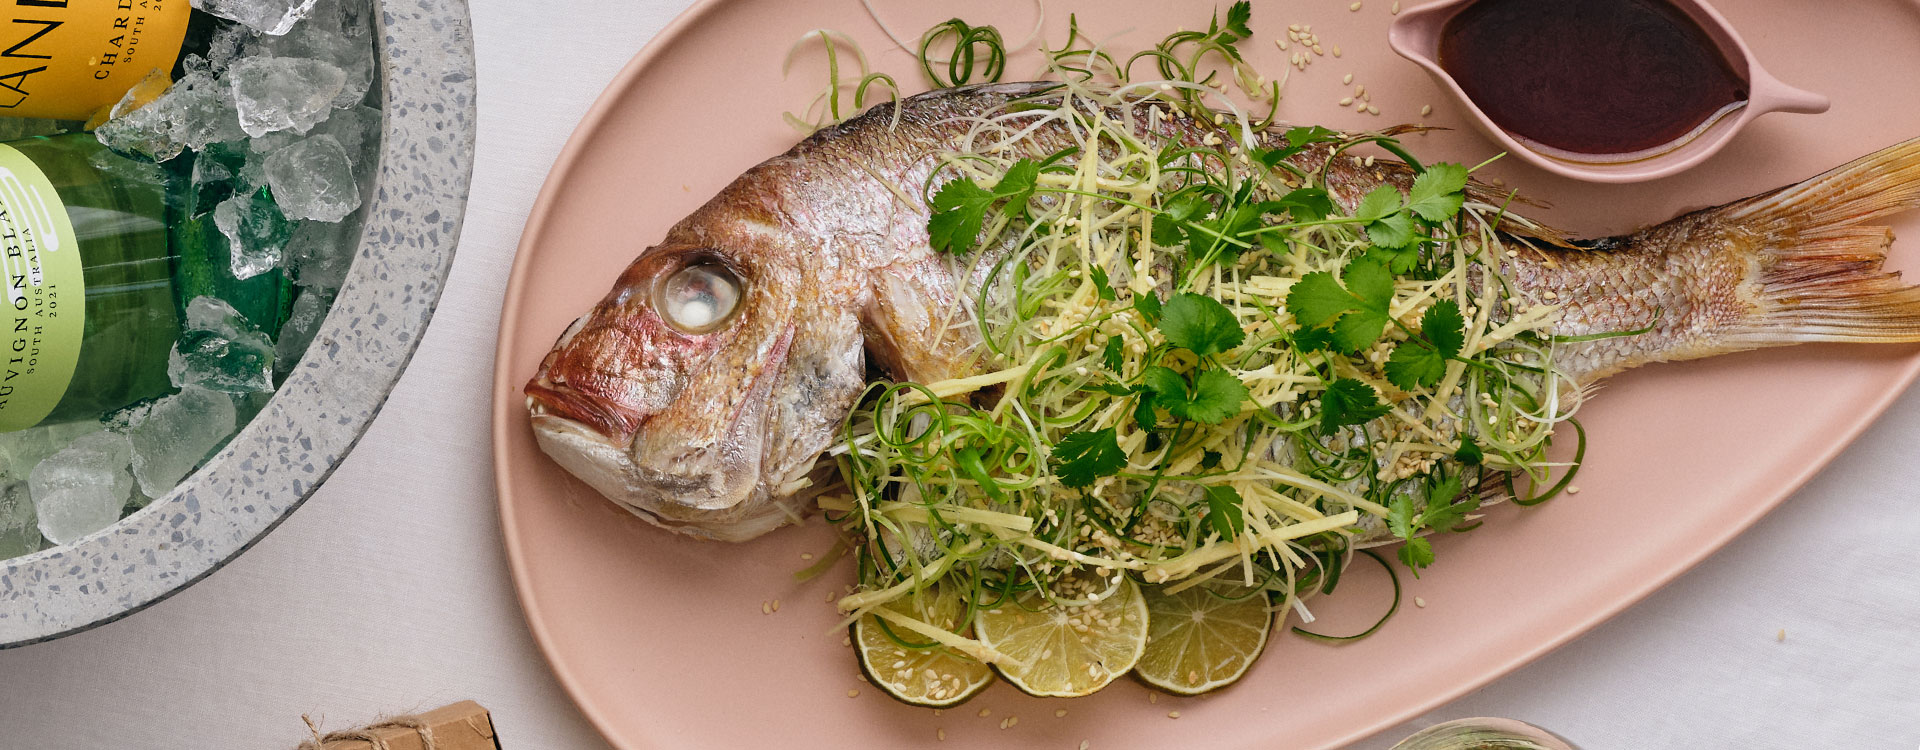 A Roasted Snapper for Your Christmas Dinner